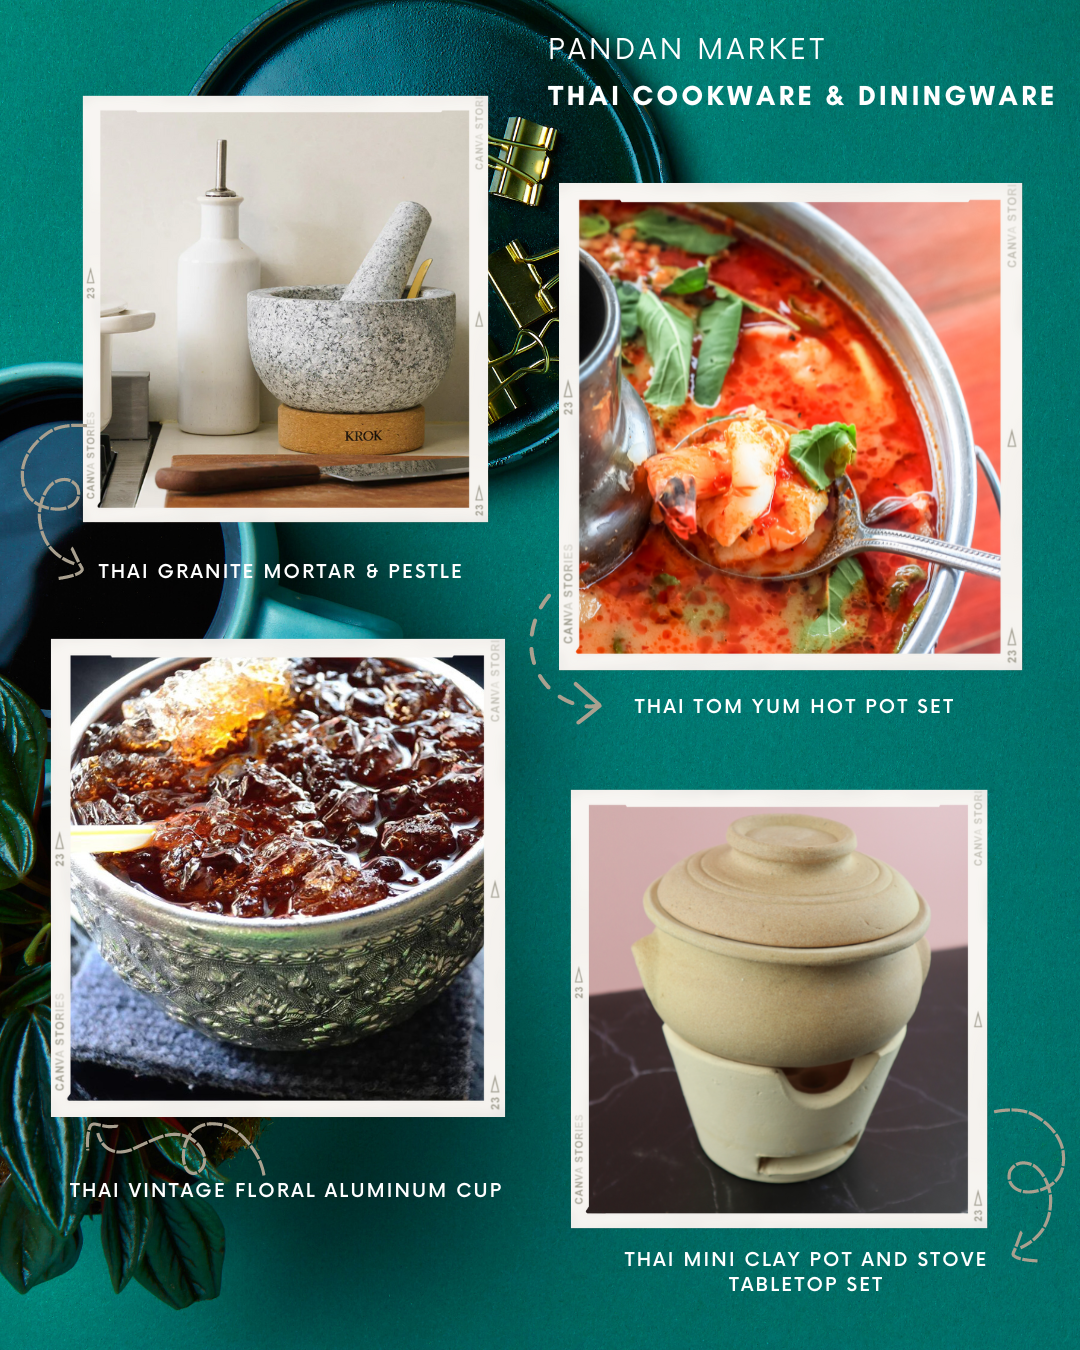 Explore our Thai Cookware & Diningware Collection